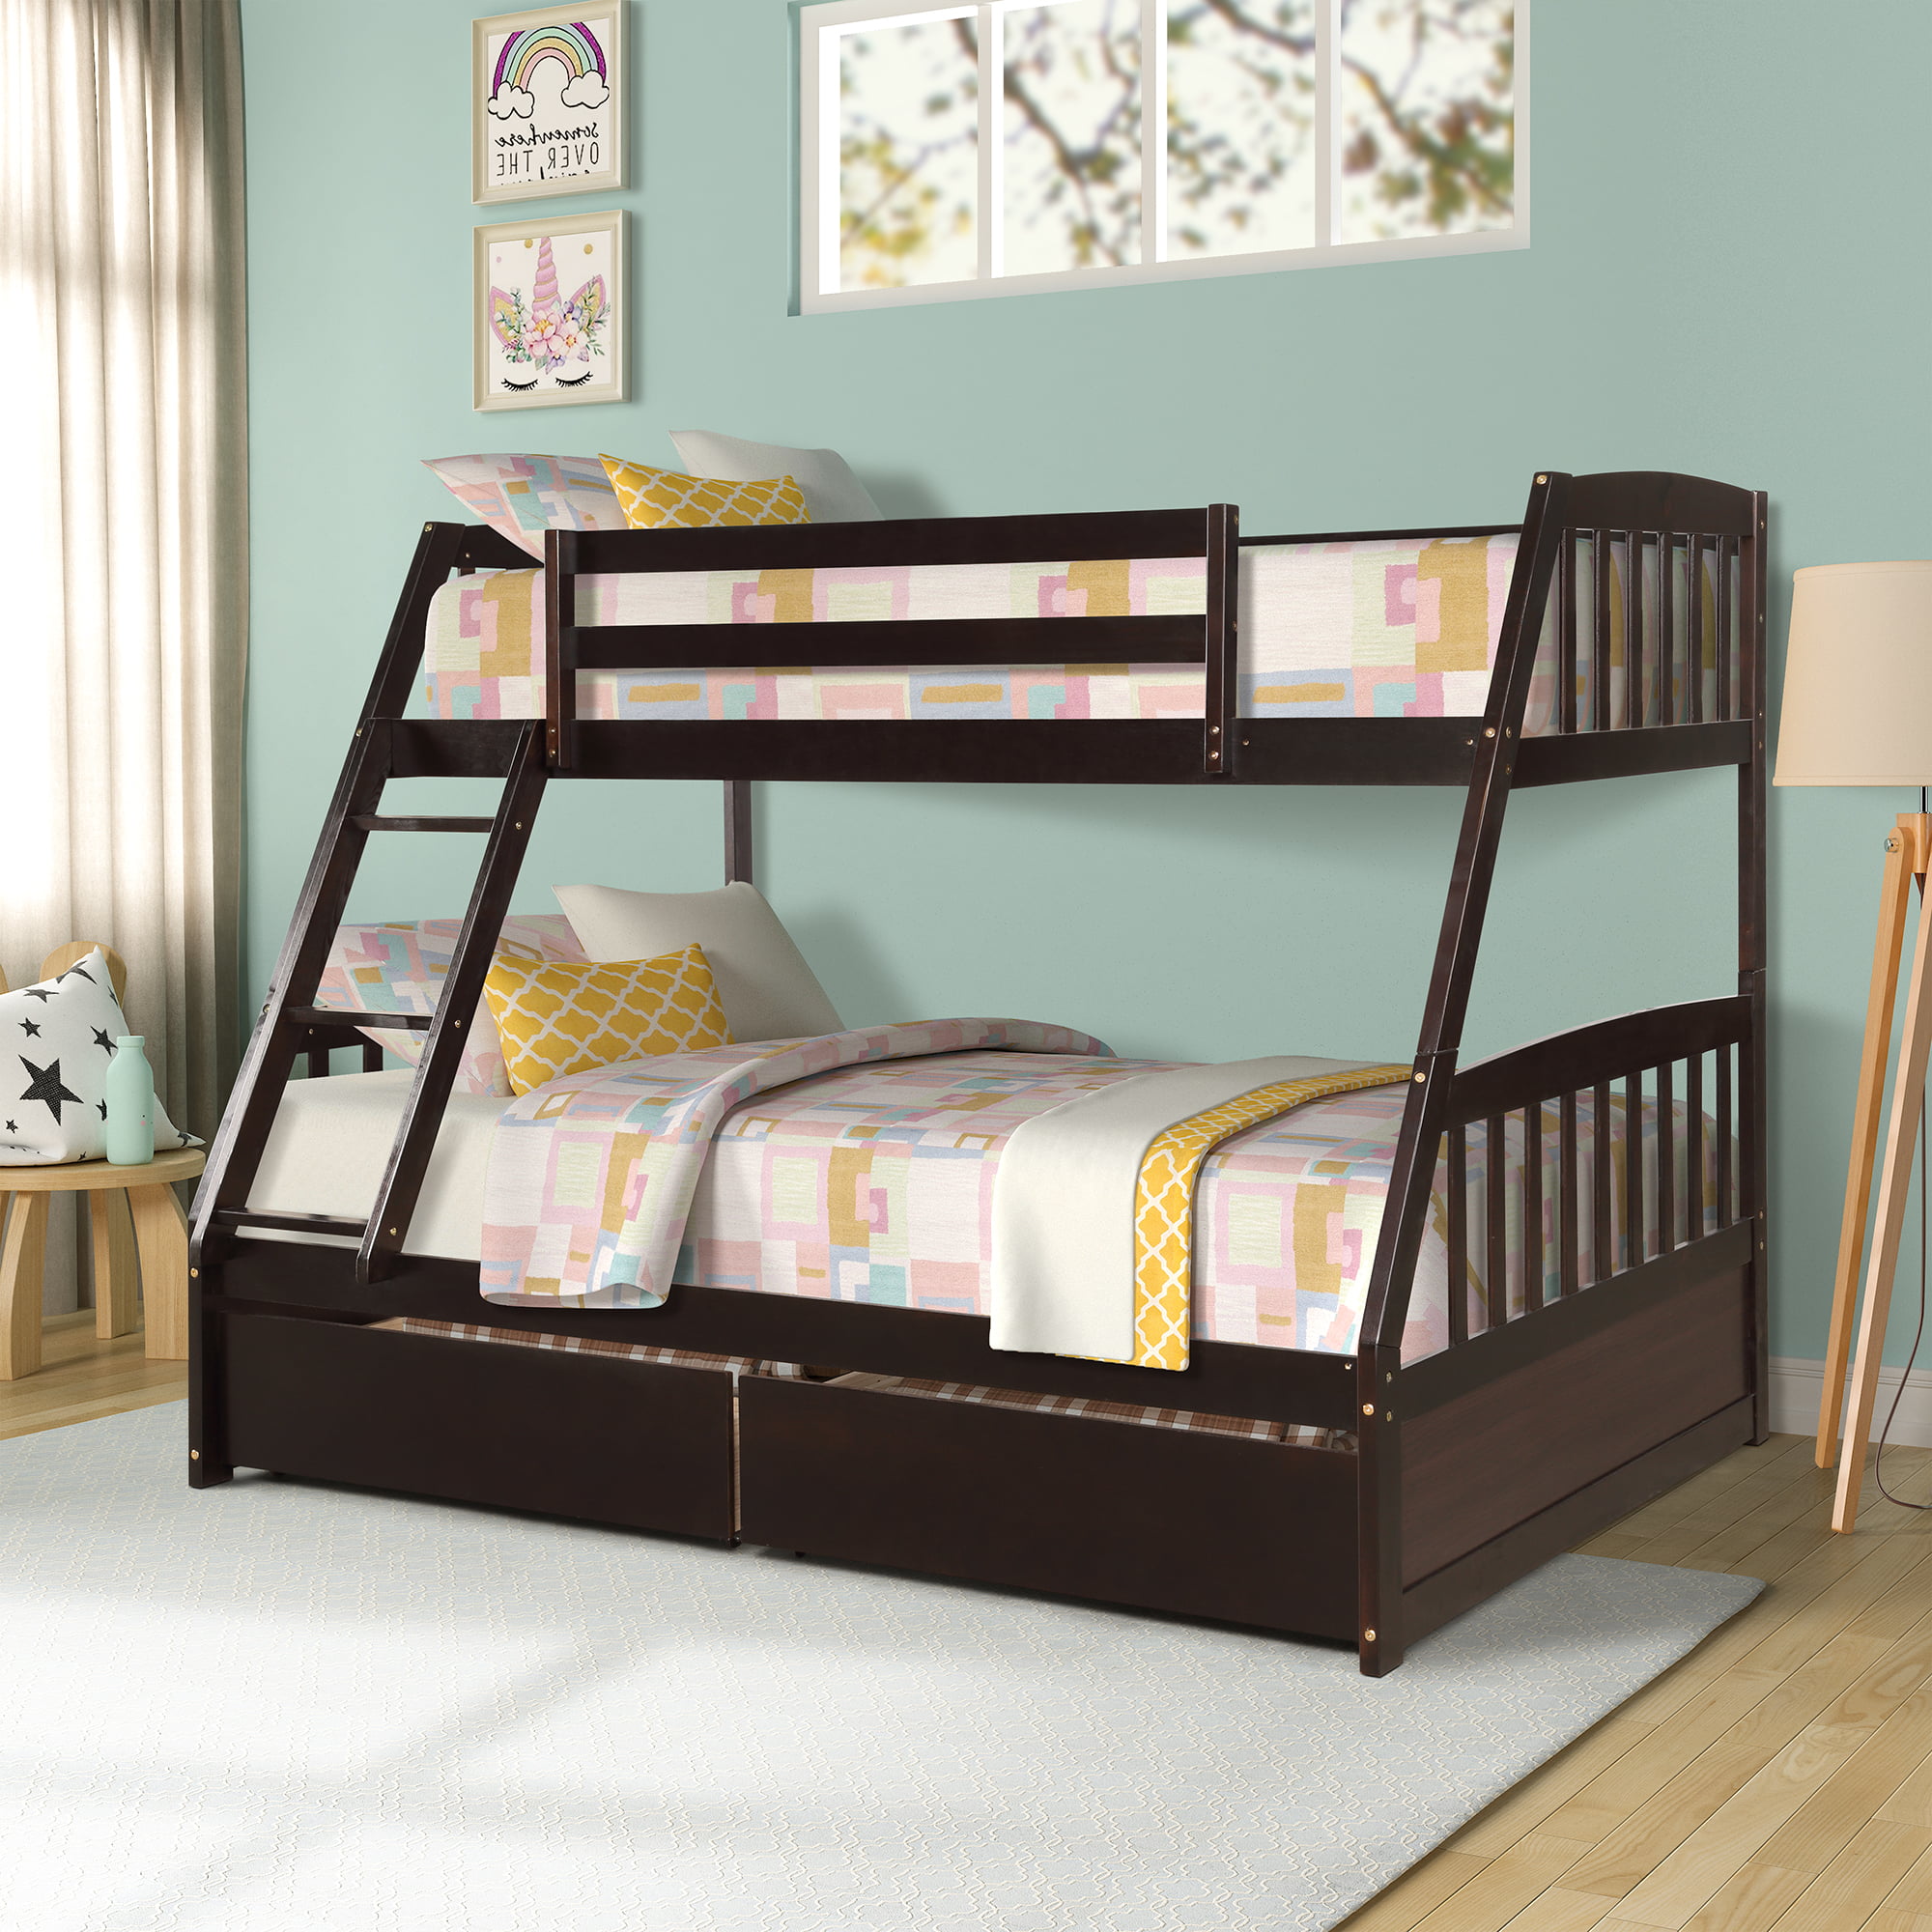 Headboard Twin Over Full Bunk Bed, Wood Bunk Beds Twin Over Full With Drawers